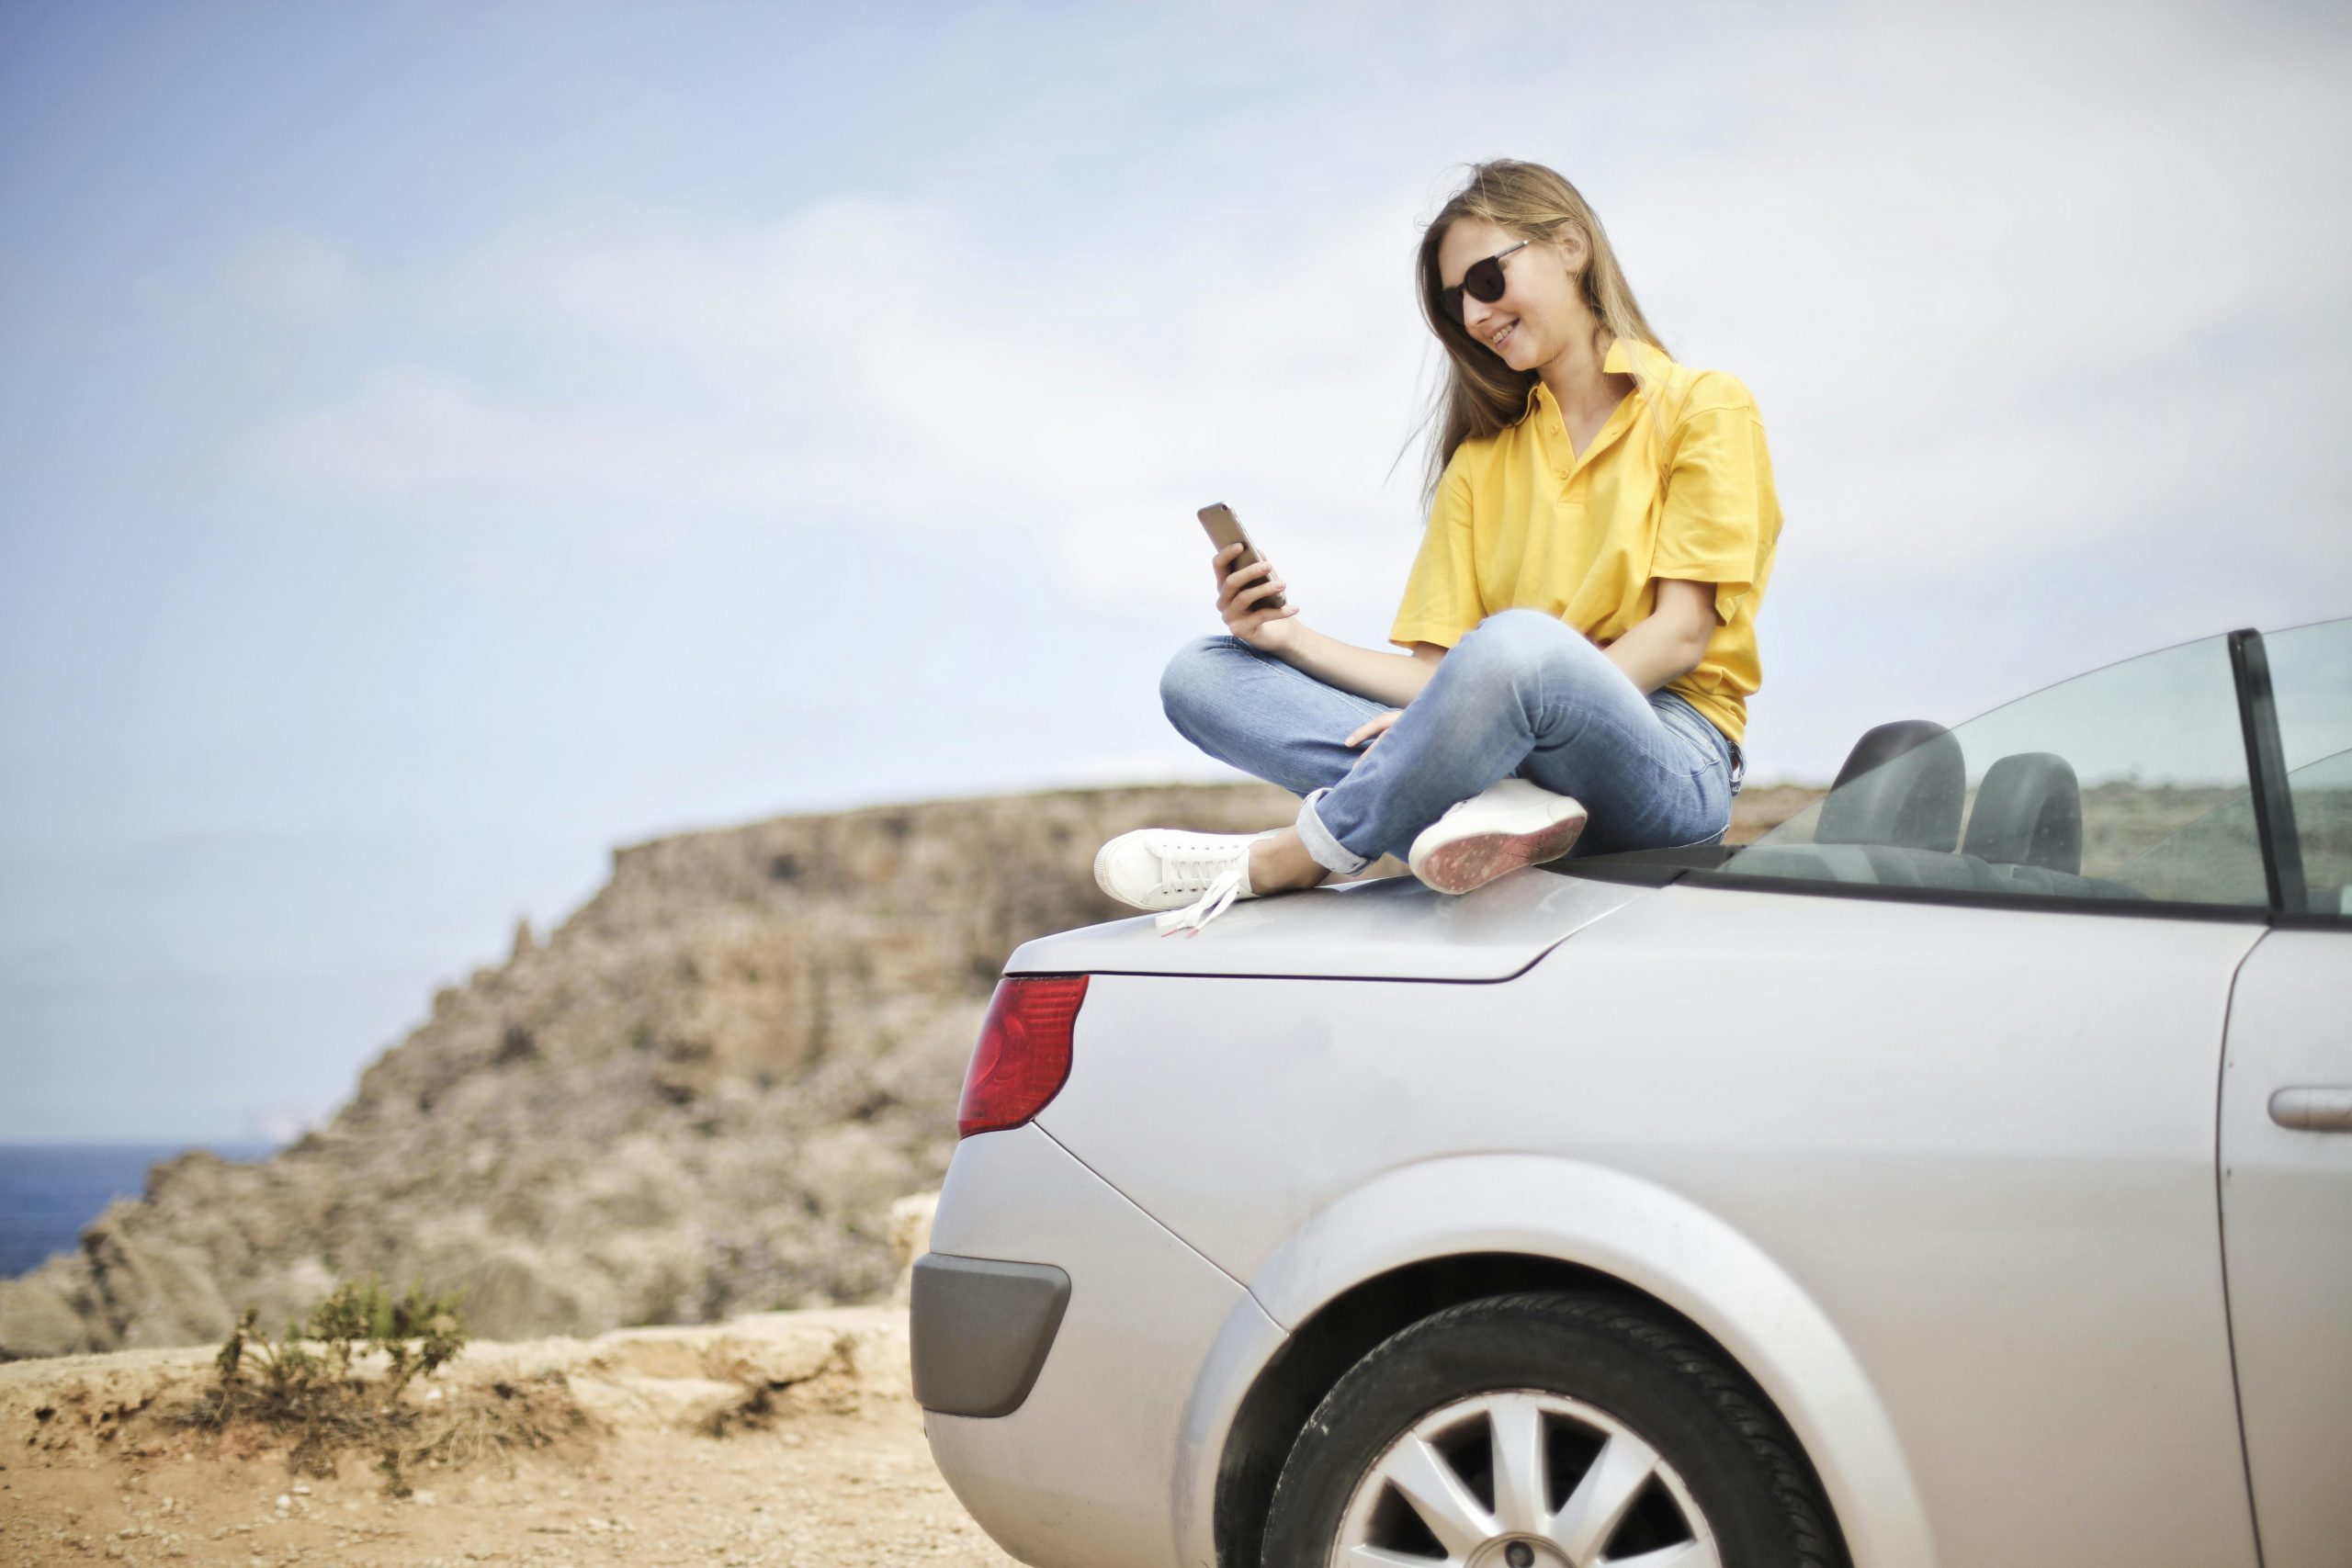 lady sitting on a car using her phone for roaming